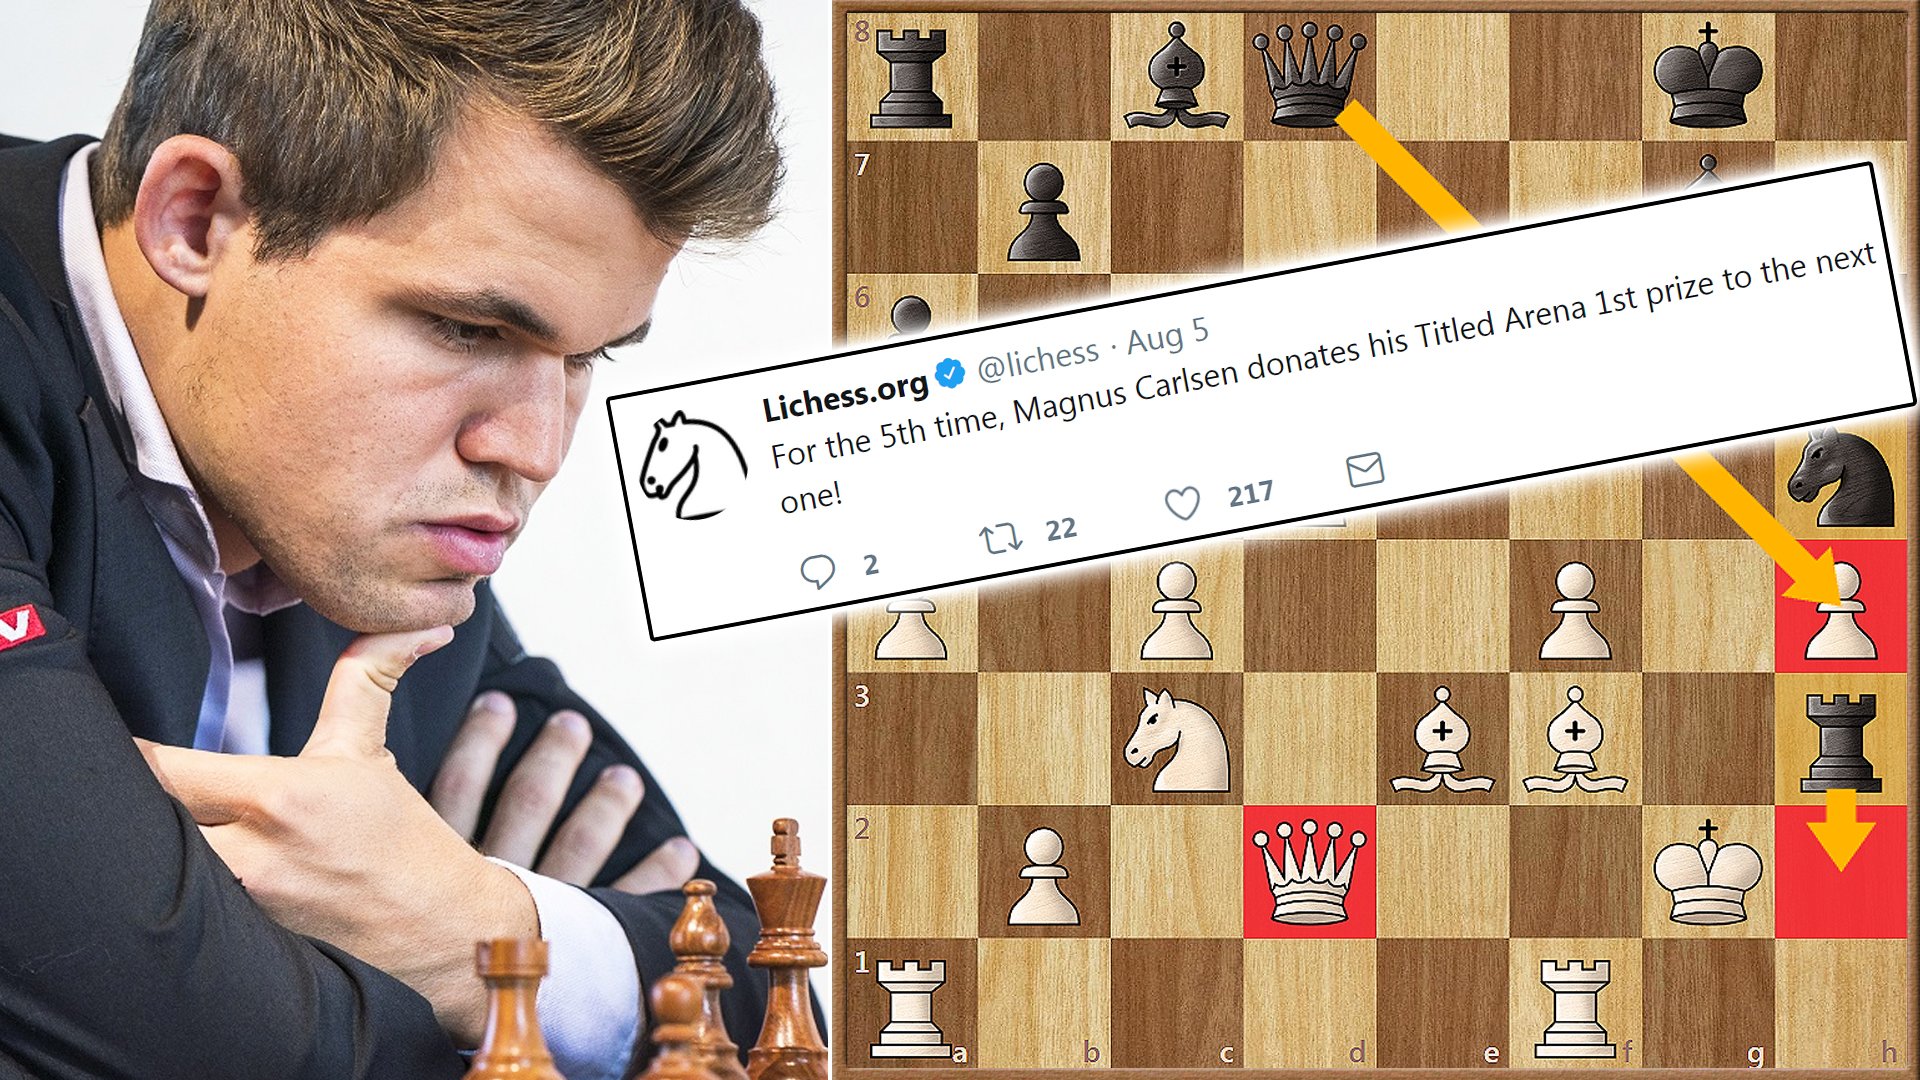 lichess.org on X: This position occurred in Firouzja-Carlsen from the June  2020 Lichess Titled Arena. Magnus is down a lot of material, but there is  still one chance to save a draw.